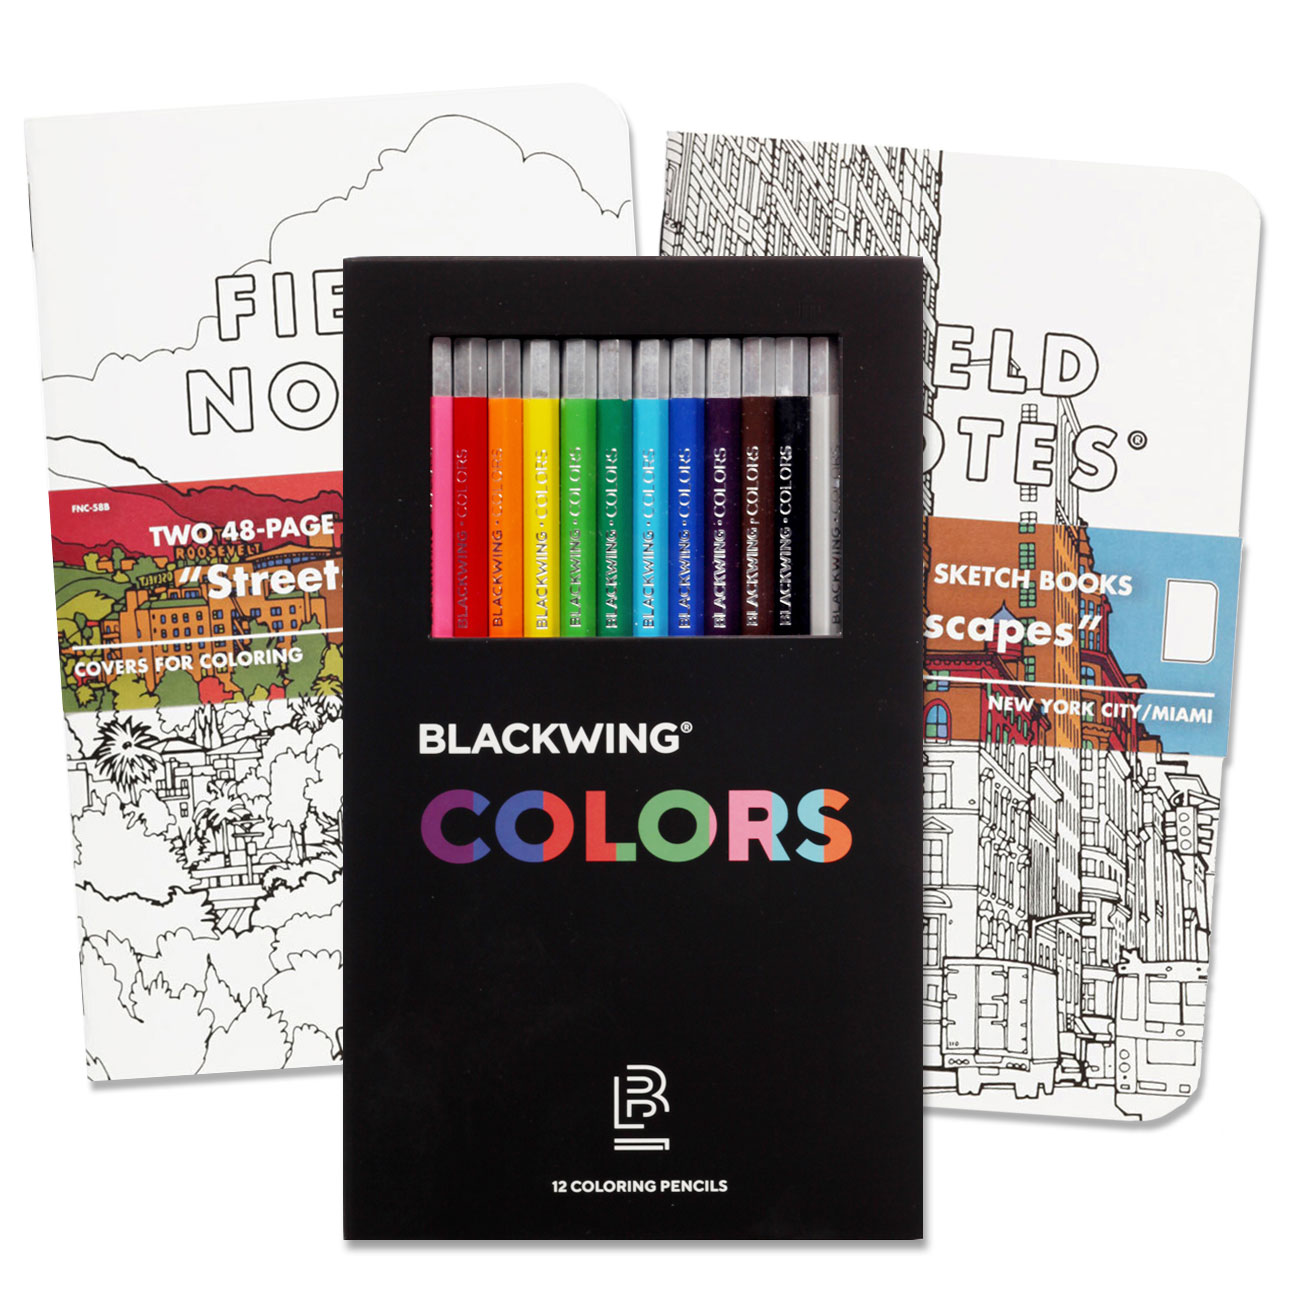 FIELD NOTES – STREETSCAPES  meets BLACKWING